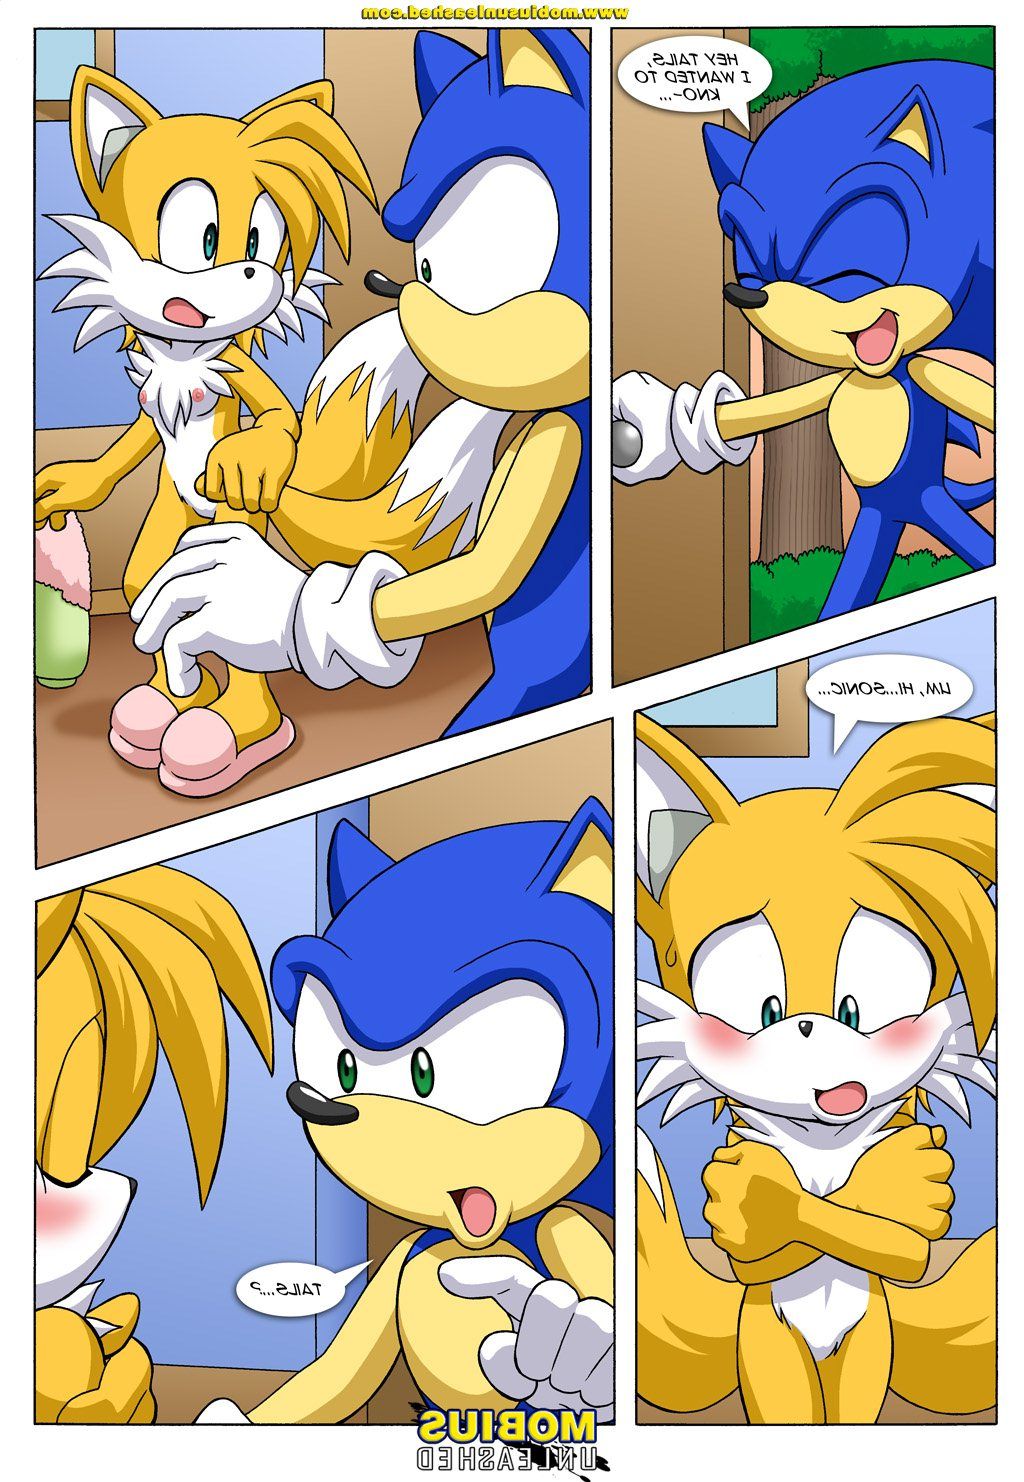 pal-comix-tails-tales image_13450.jpg